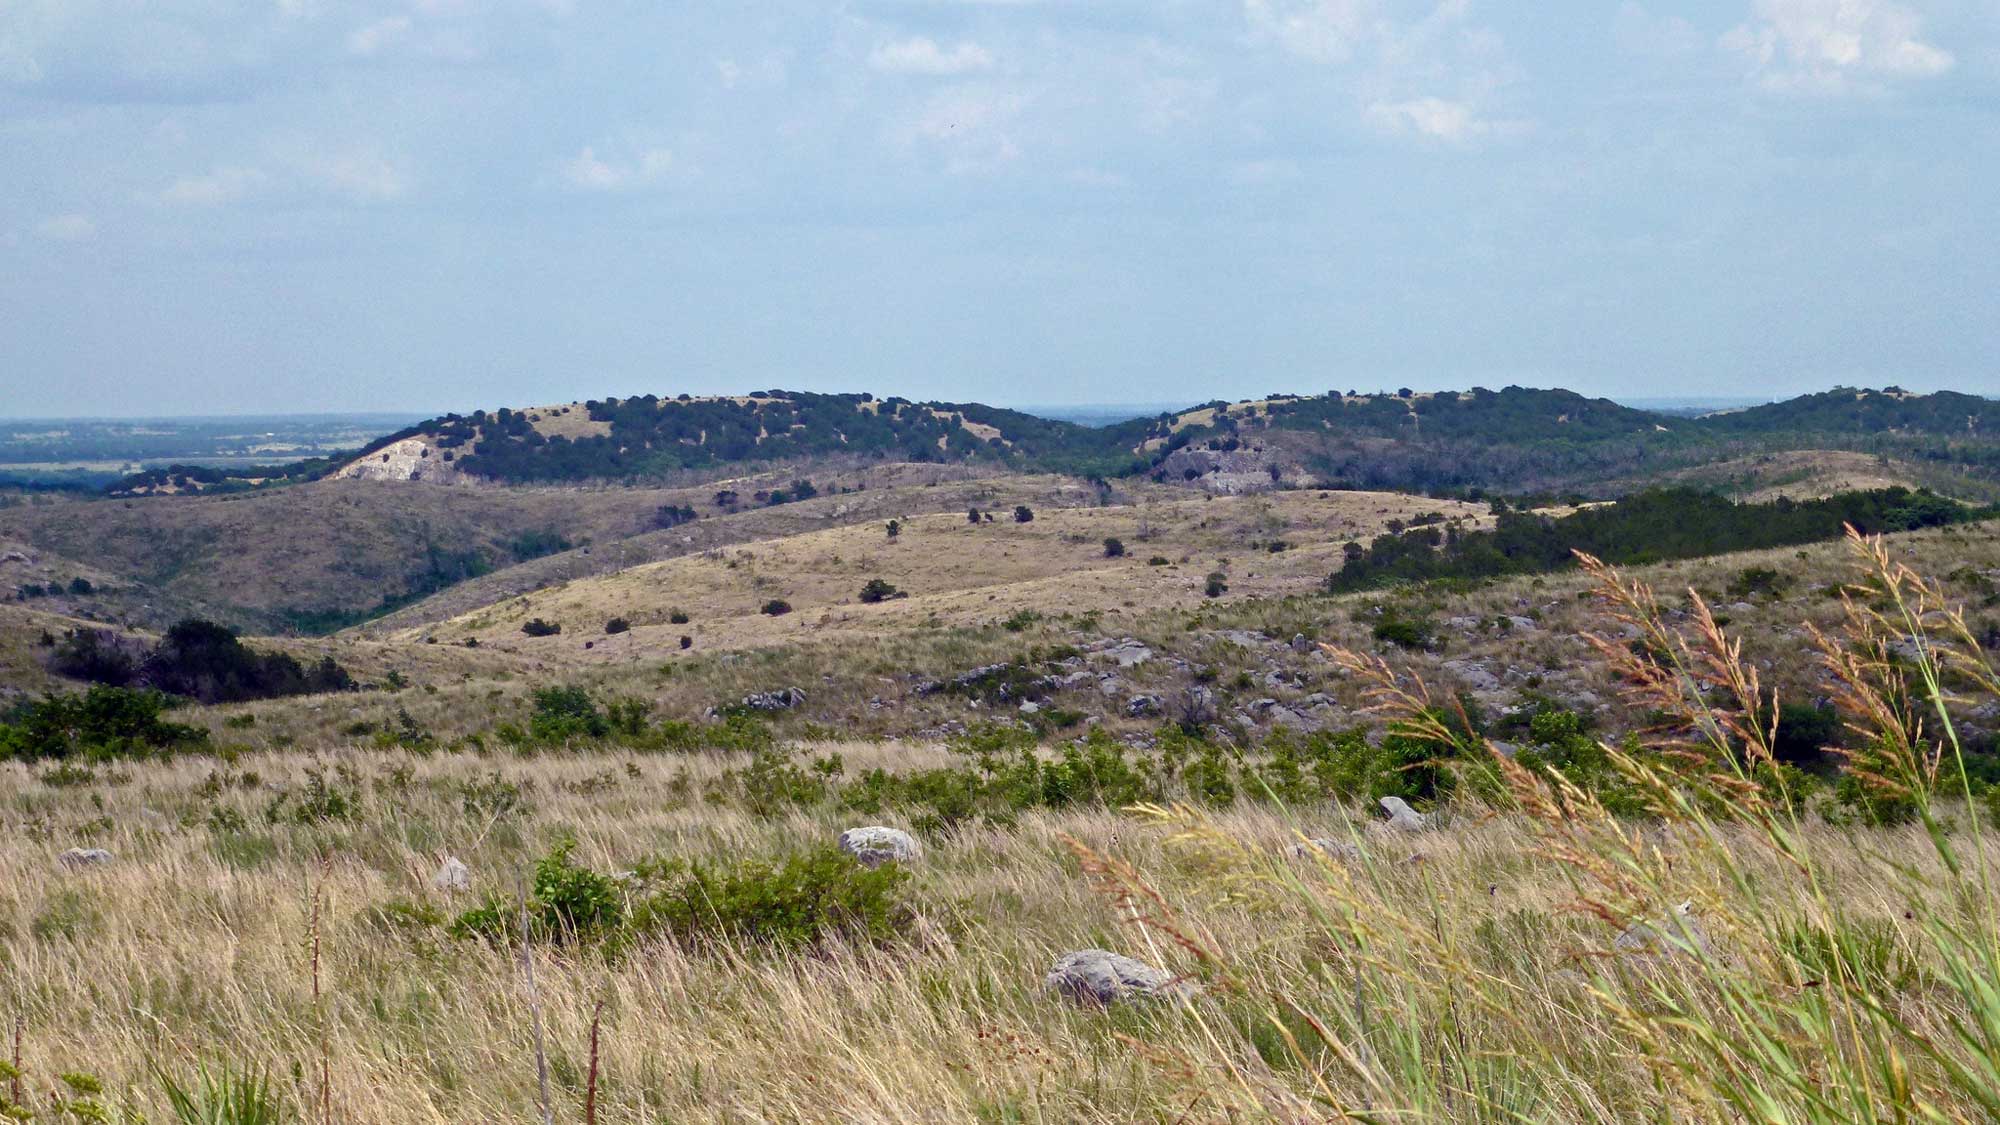 Photograph of the Arbuckle Mountains, Oklahoma.